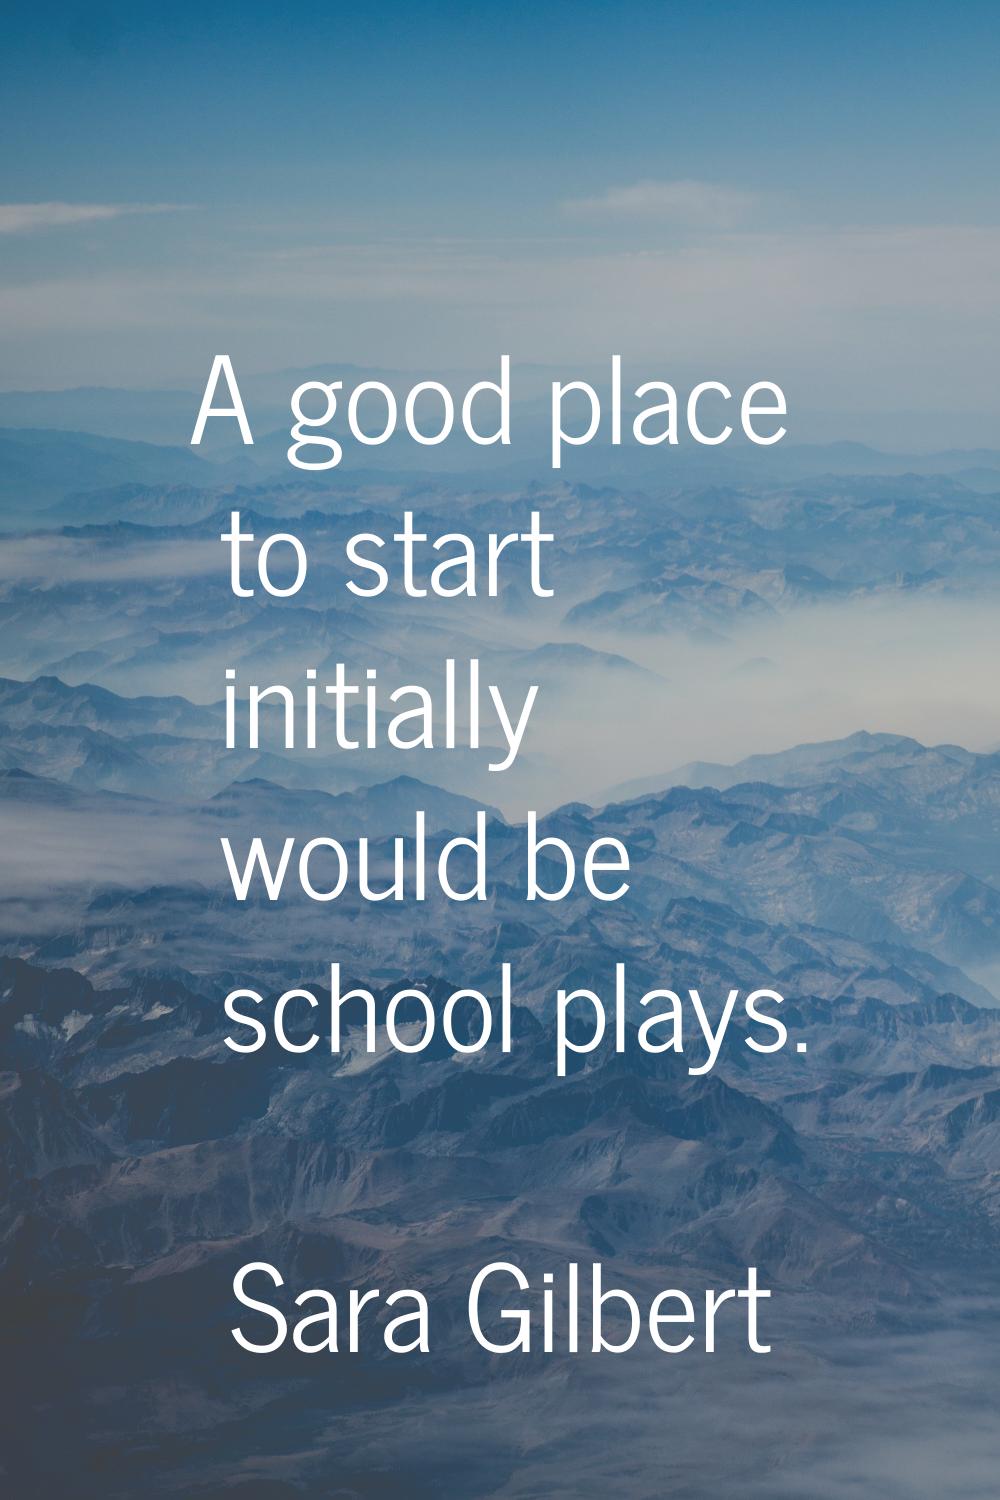 A good place to start initially would be school plays.